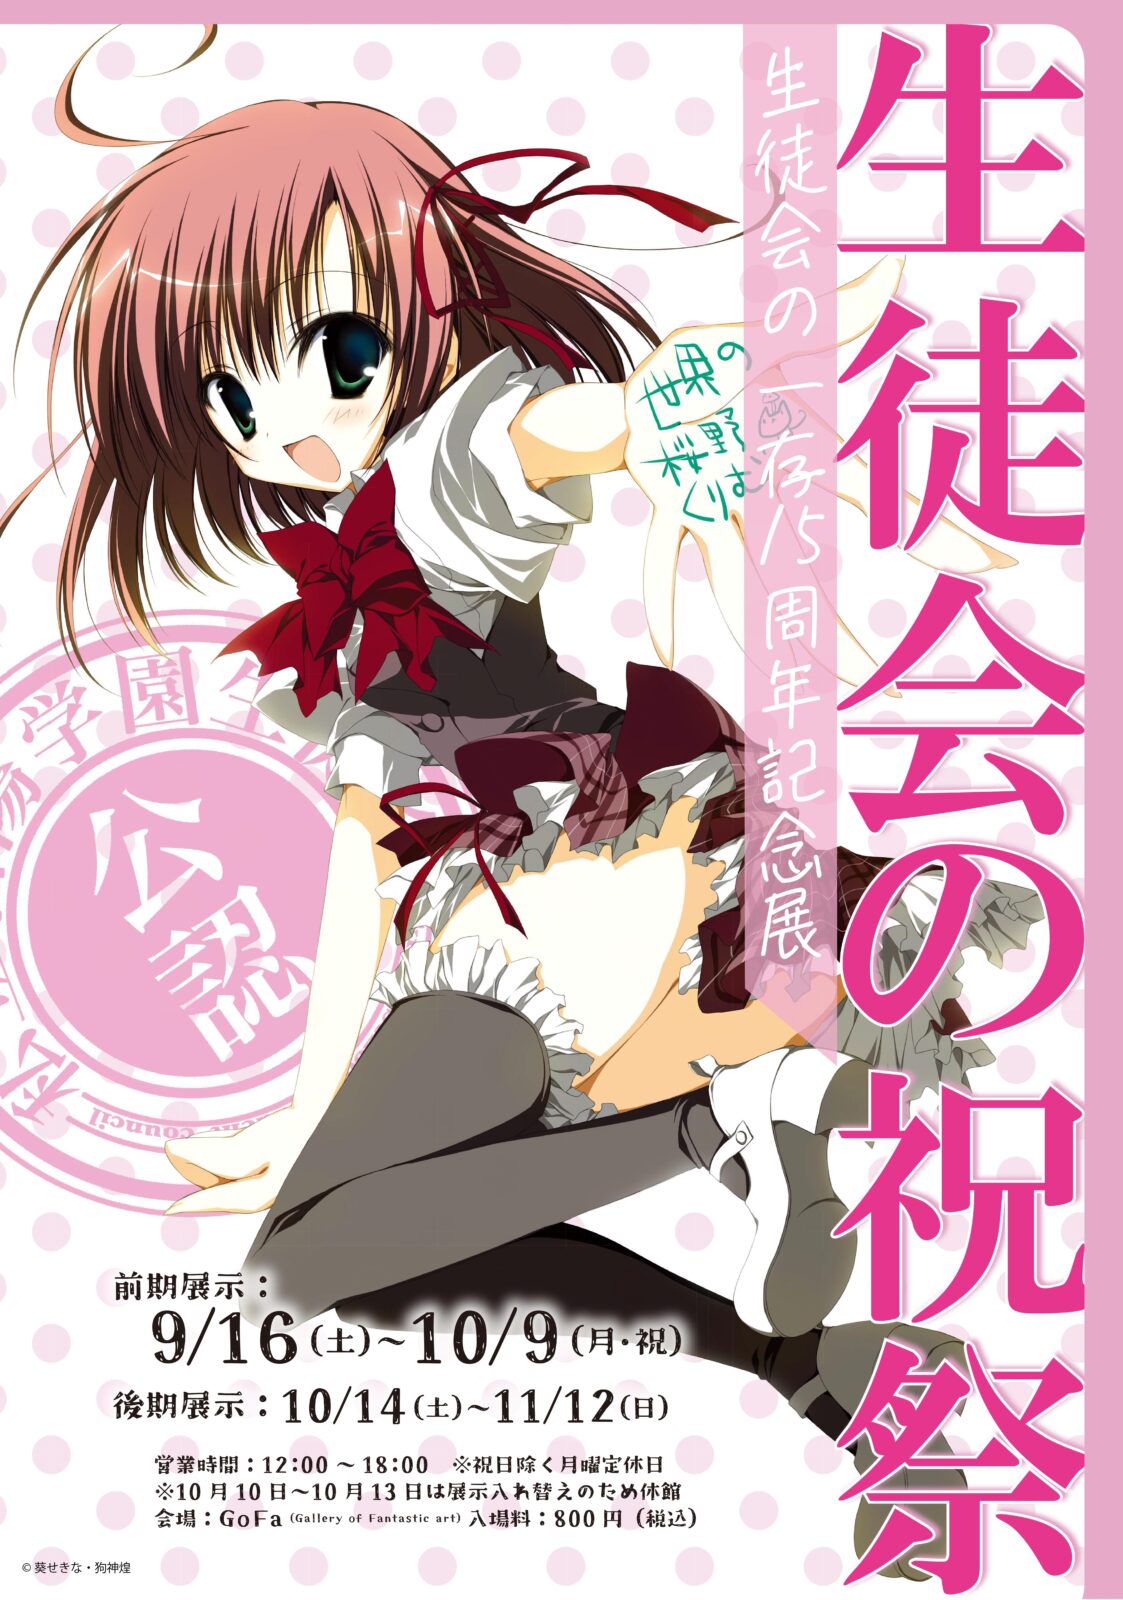 To Love Ru Celebrates 15th Manga Anniversary With Special Exhibition